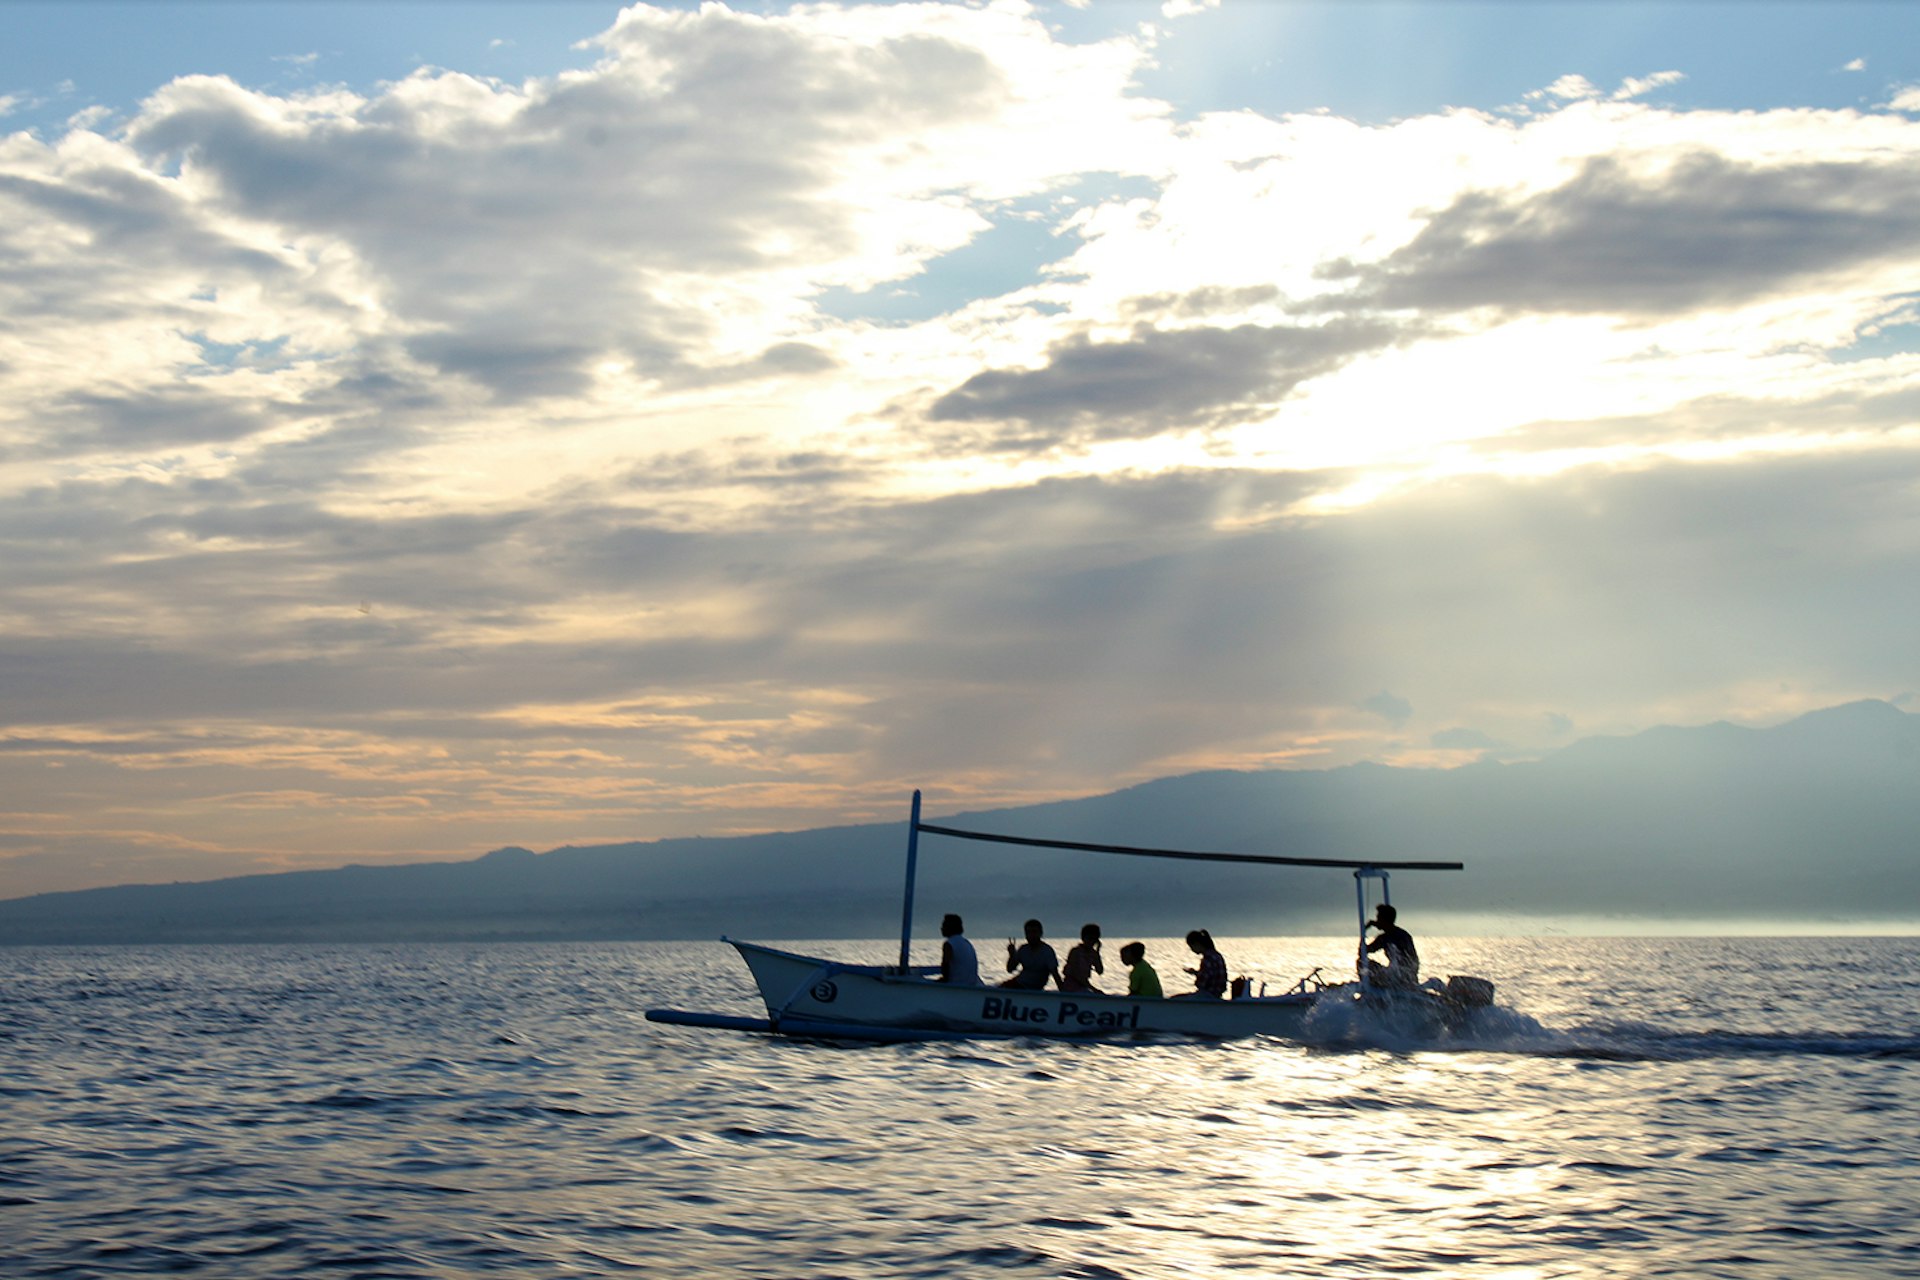 Don't consider yourself a morning person? A sunrise boat ride in North Bali might change that. Image by Samantha Chalker / Lonely Planet